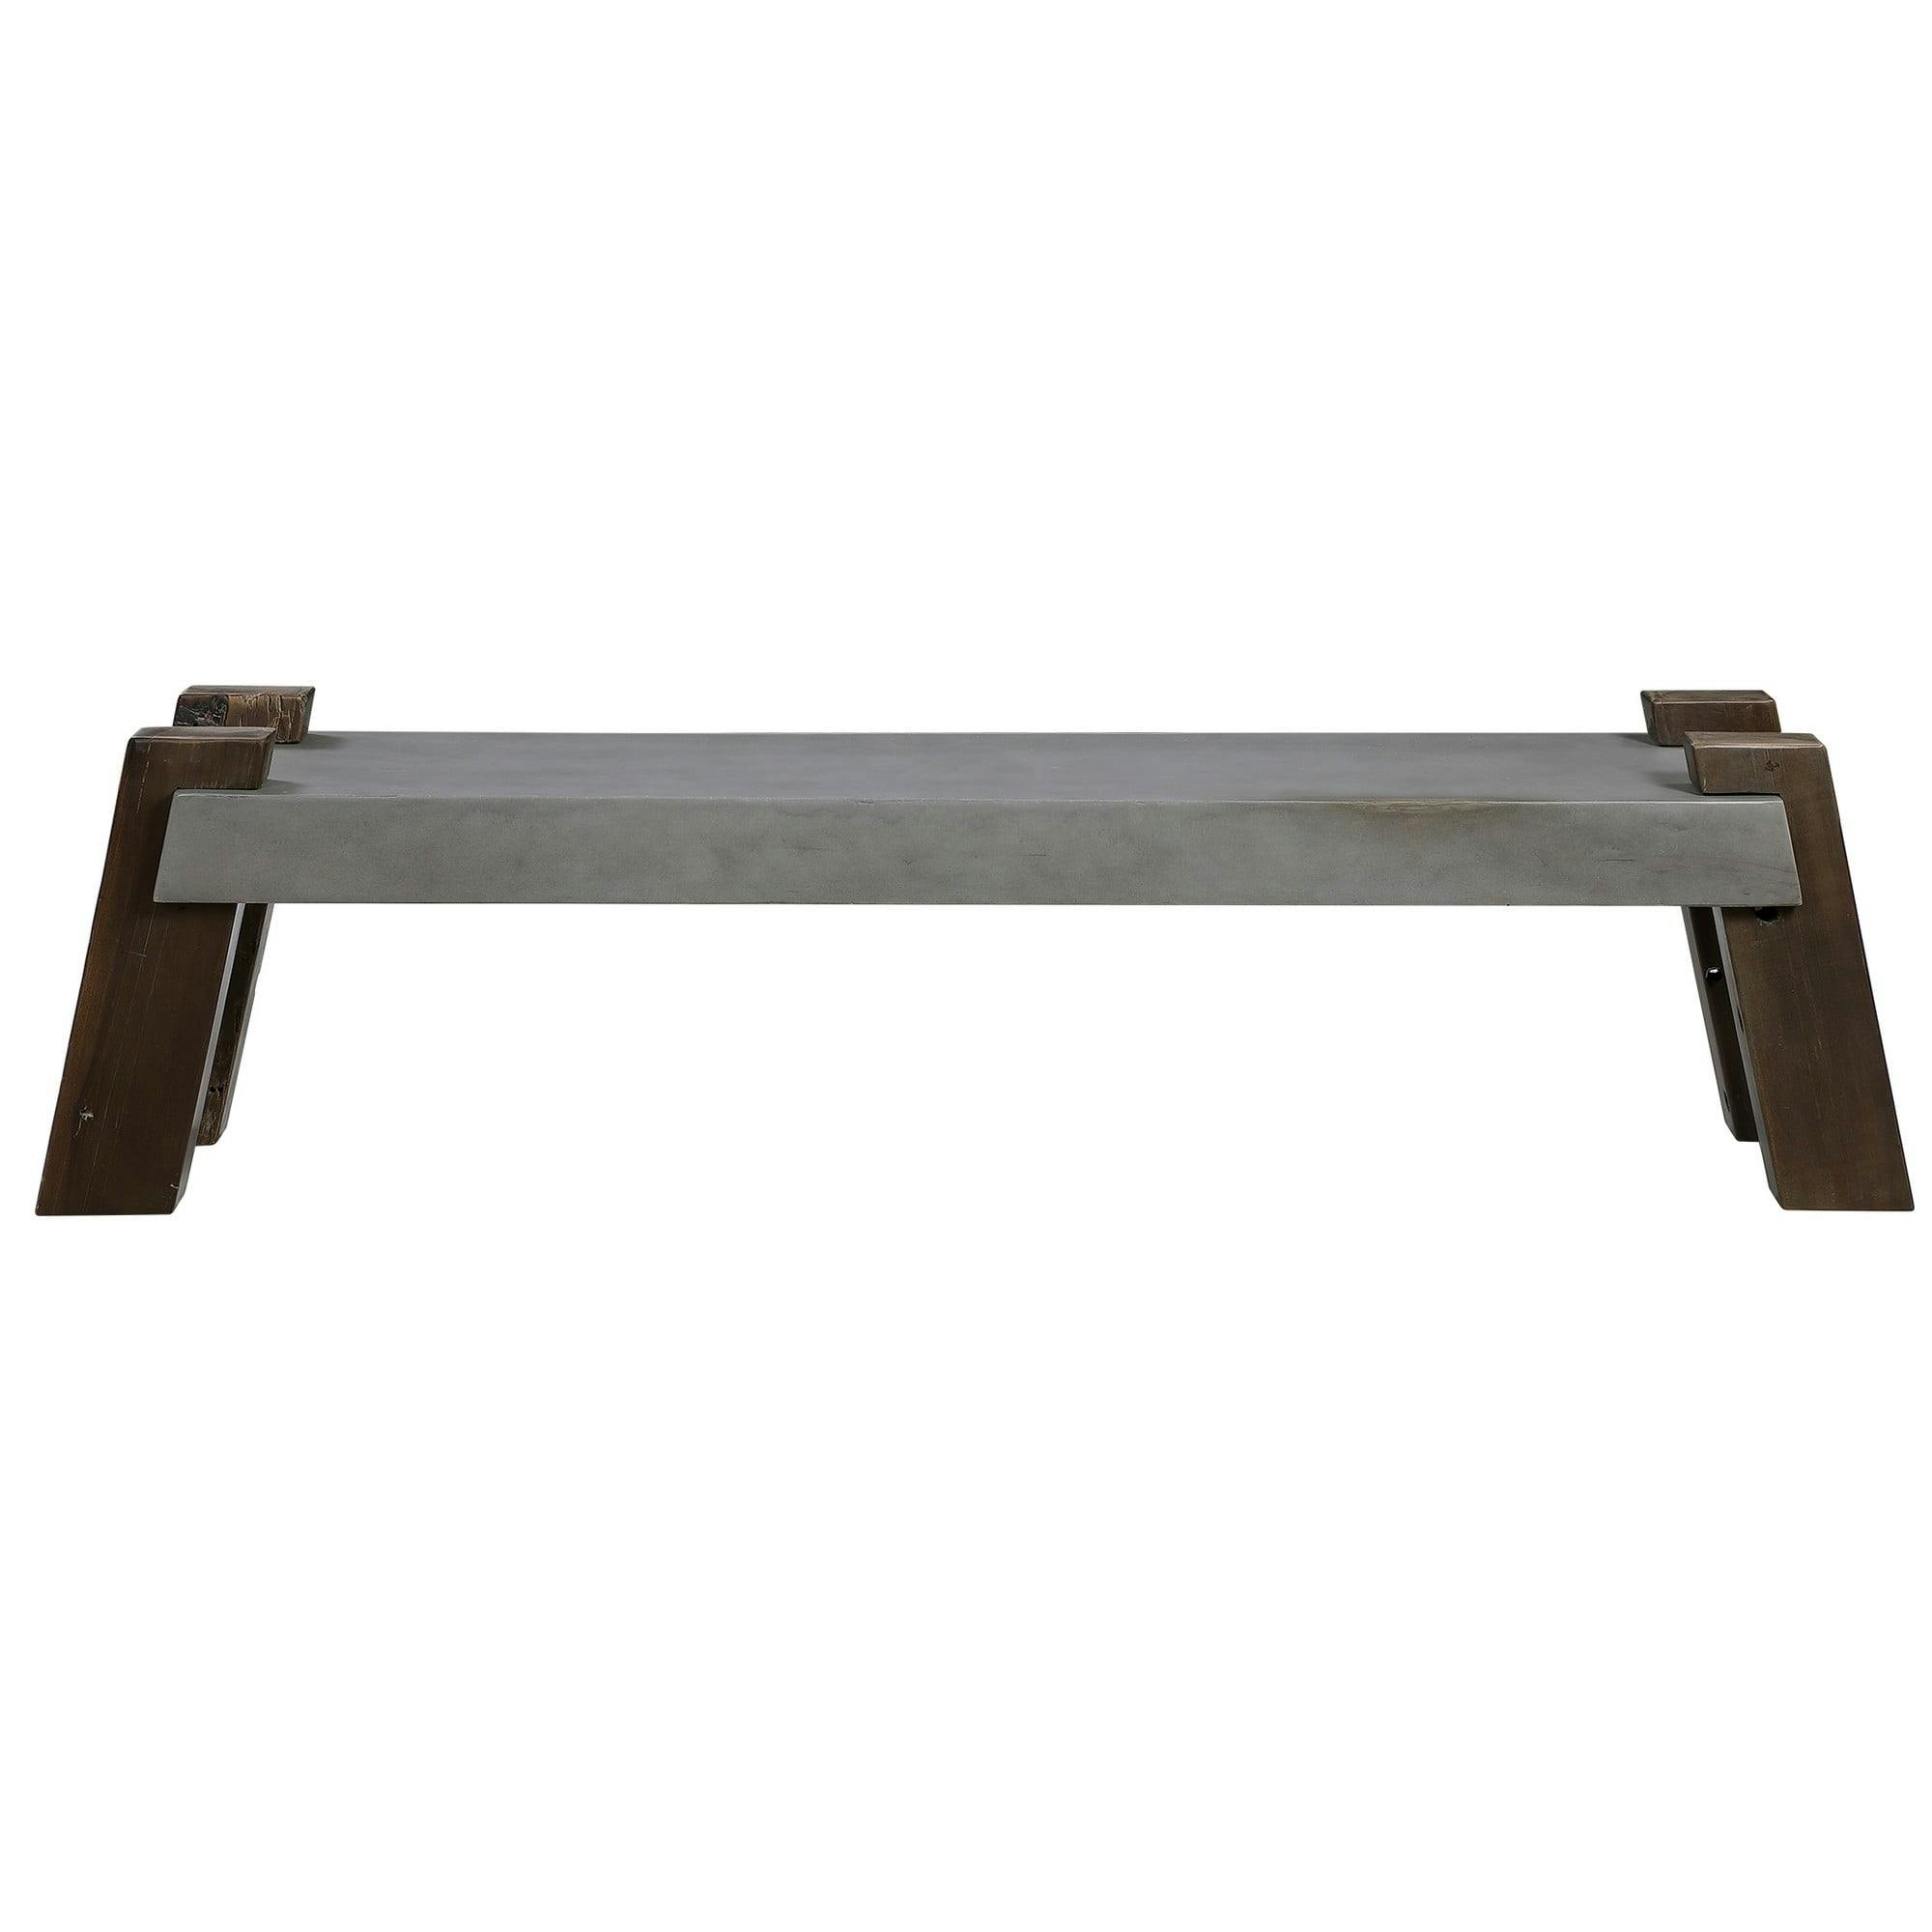 Lavin 72" Rustic Gray Concrete and Reclaimed Wood Bench